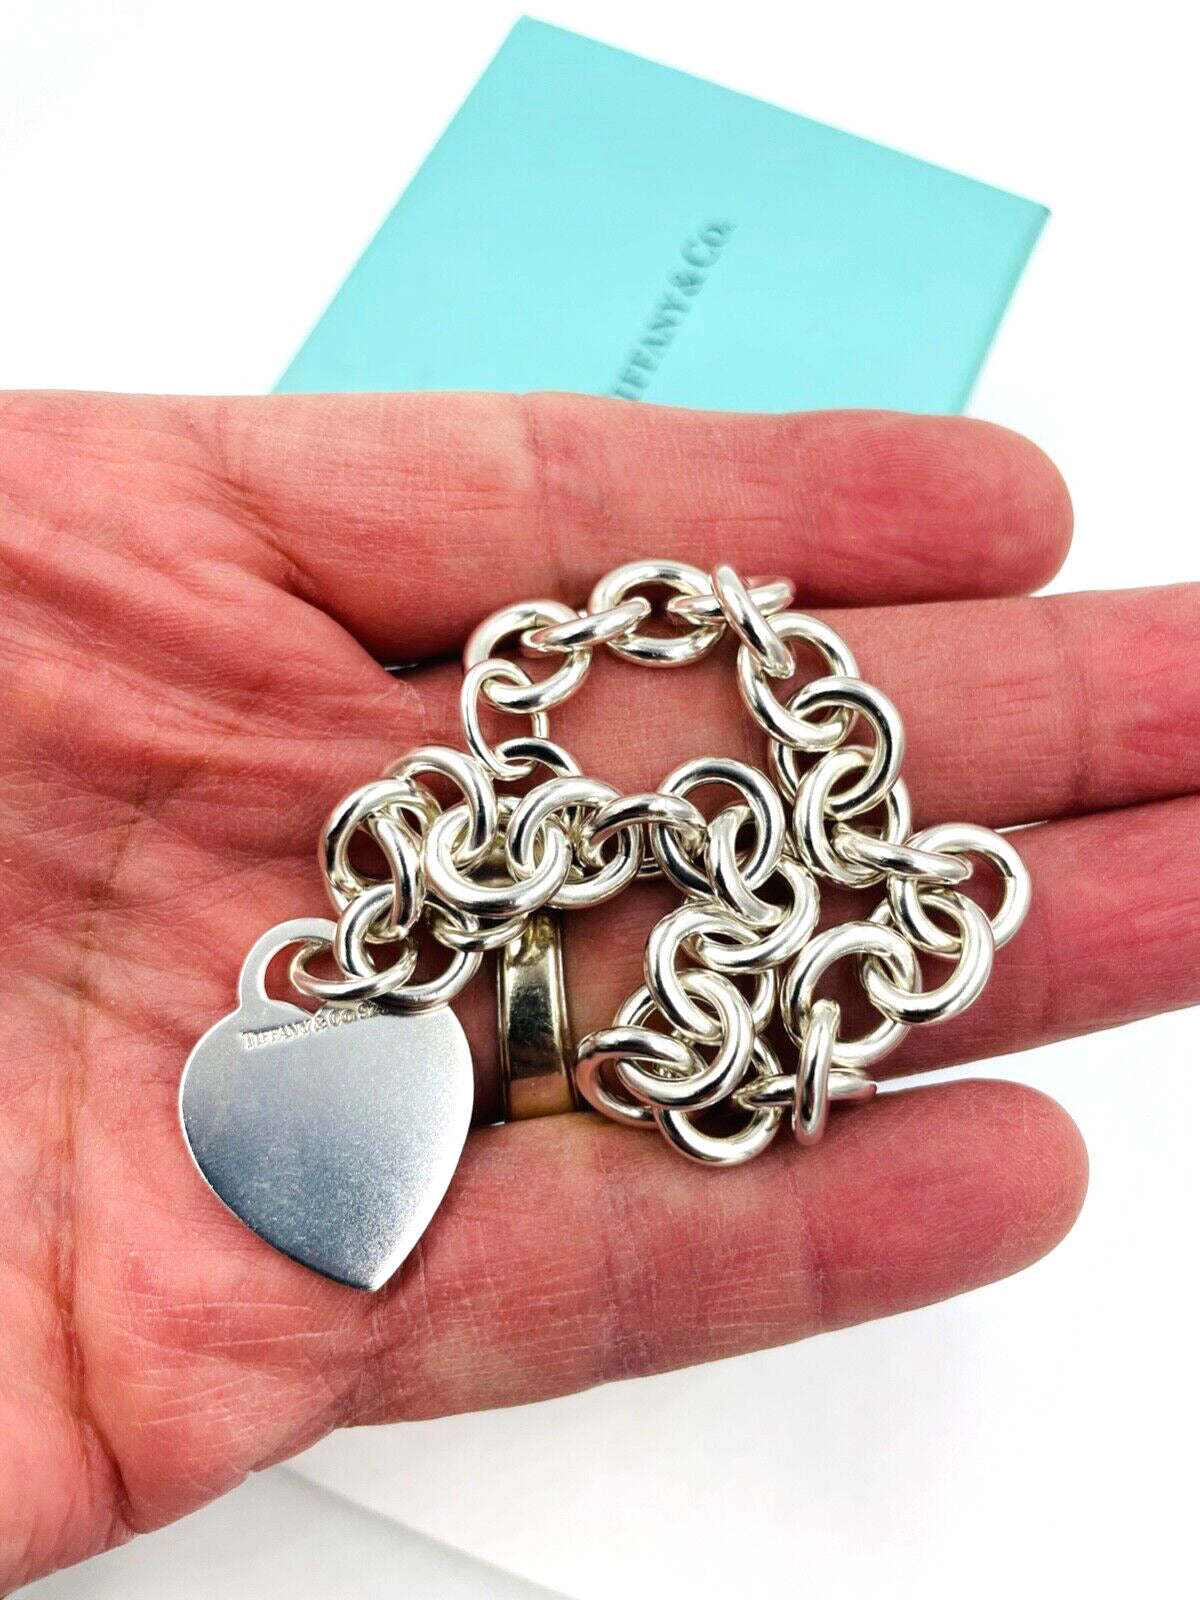 Return to Tiffany® Heart Tag Charm Bracelet in Sterling Silver. Authentic  Tiffany & Co. Medium Size 7.5”, 31.10 Grams